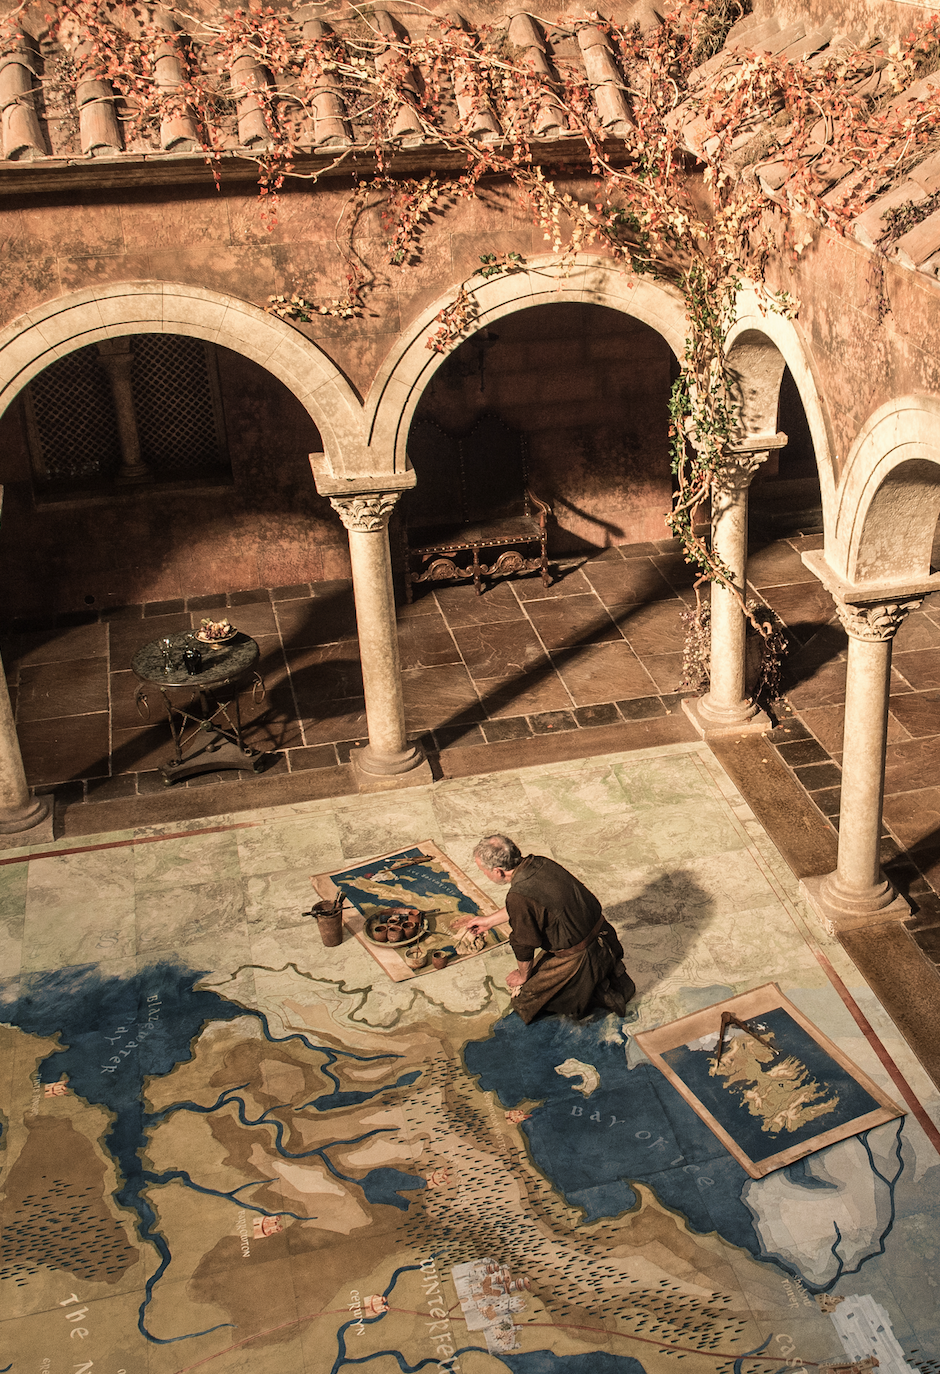 Game of Thrones, S7E1: A map in Kings Landing